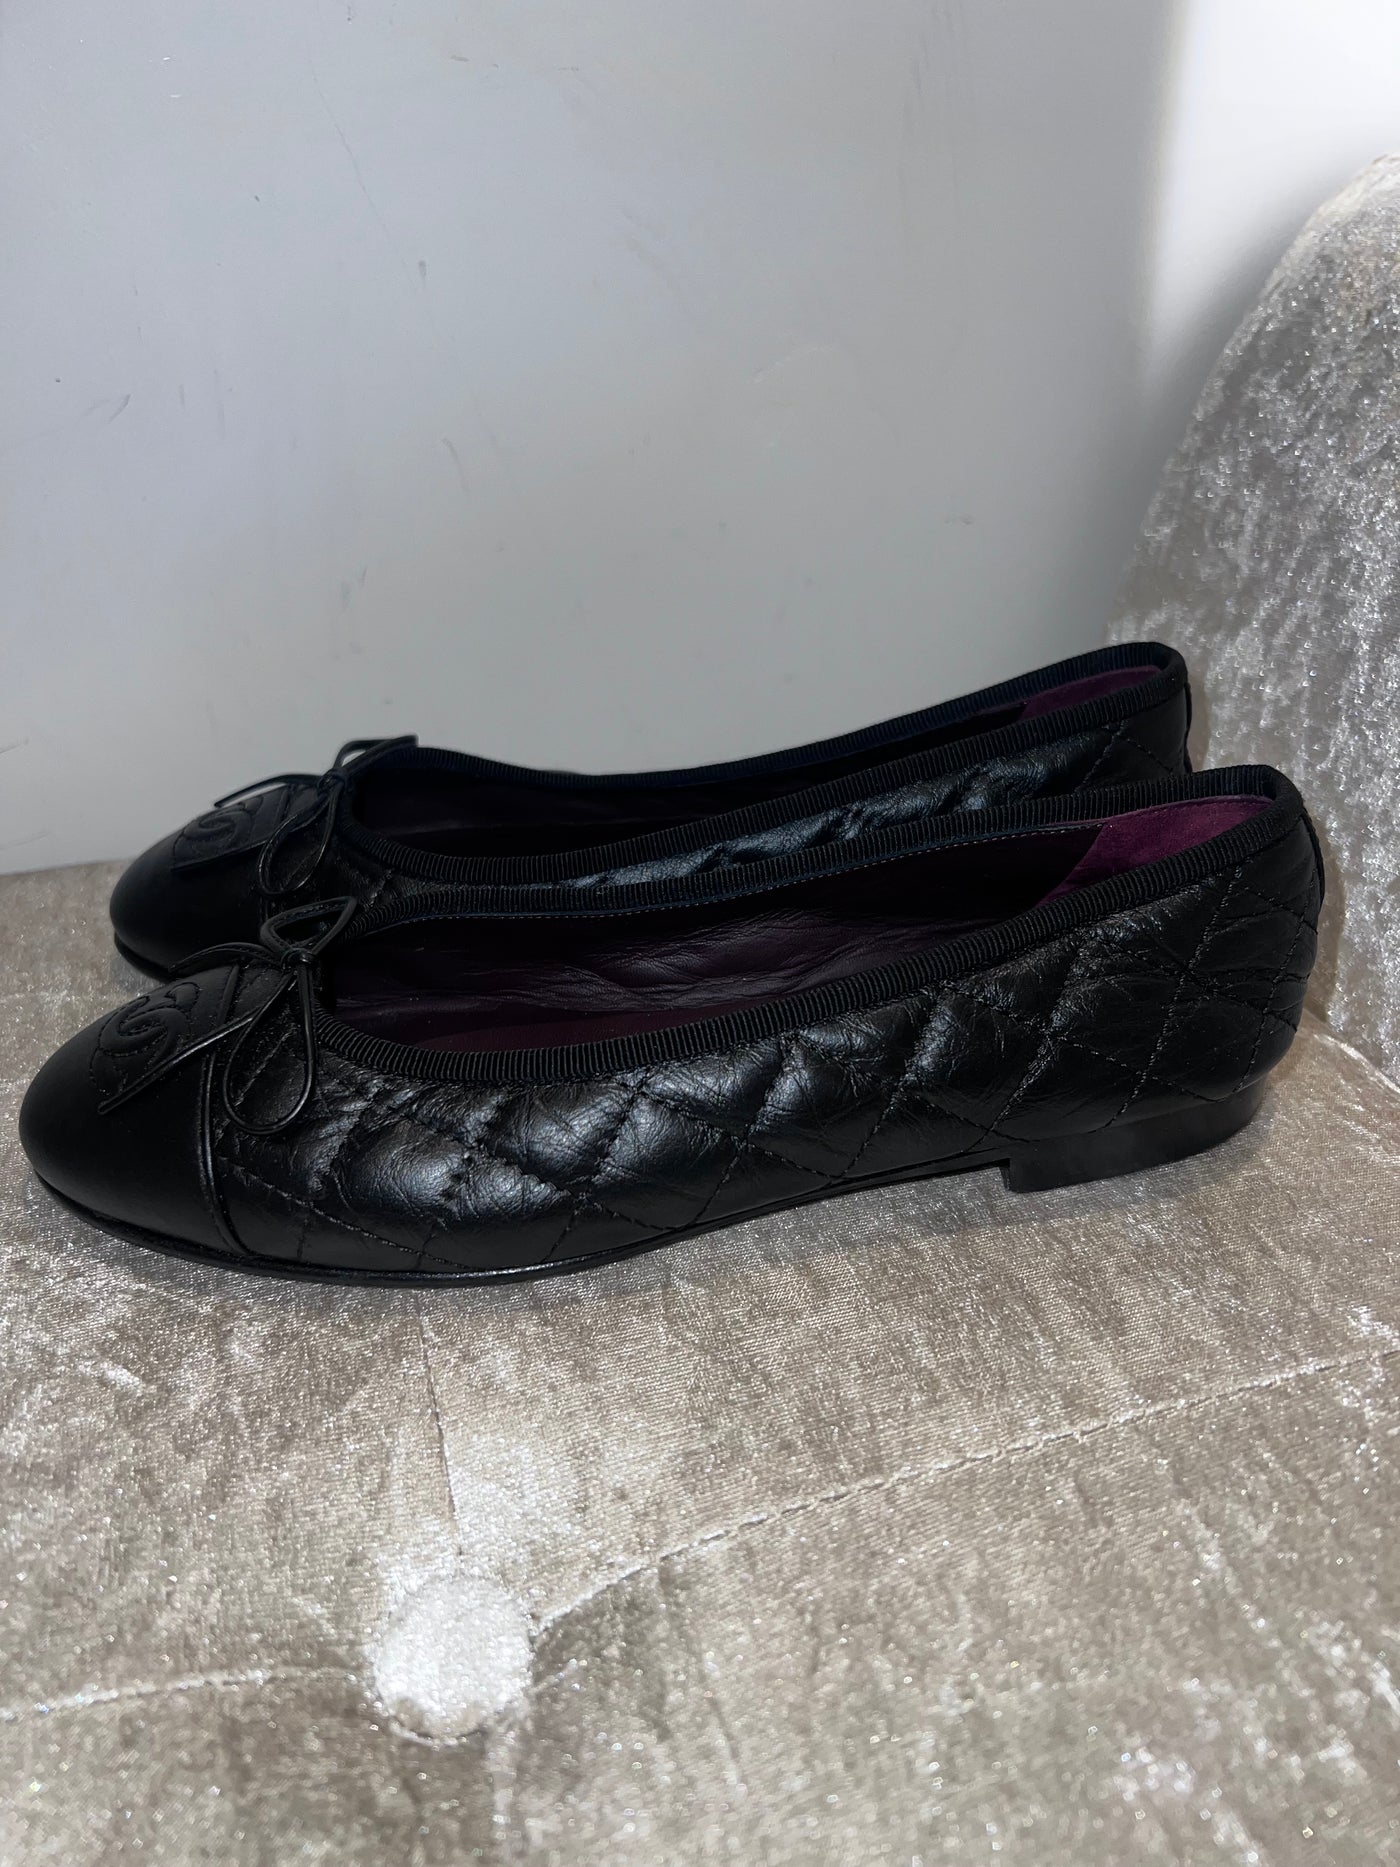 Chanel classic iconic pumps size 36.5